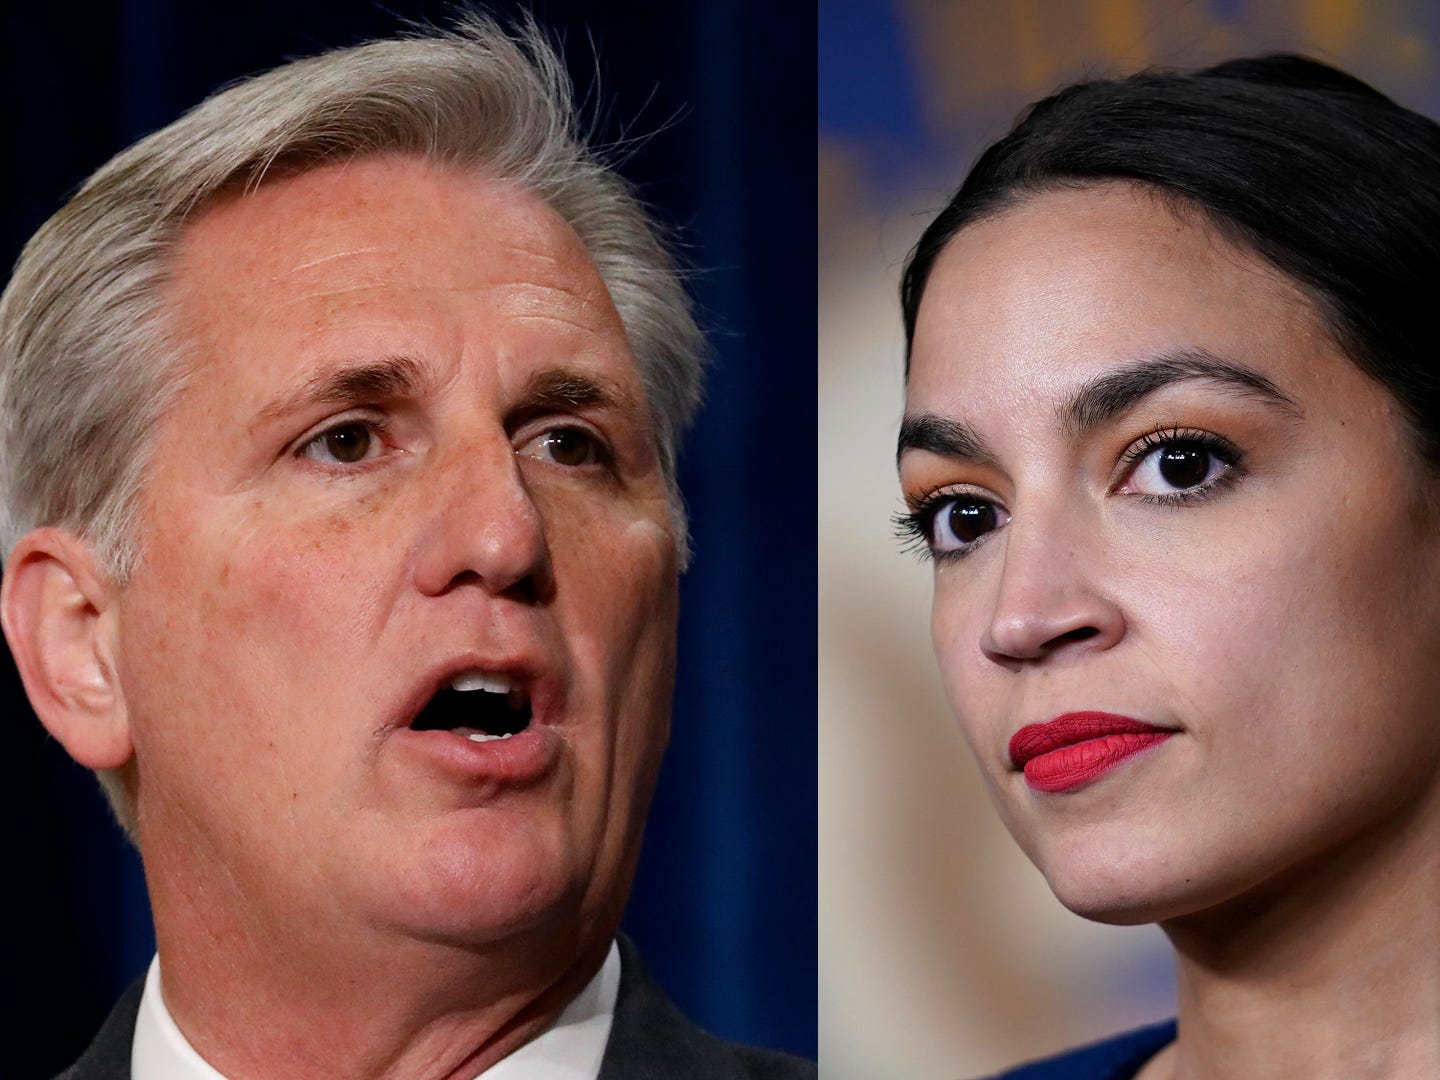 Close up images of Rep. Kevin McCarthy and Rep. Alexandria Ocasio-Cortez side by side.